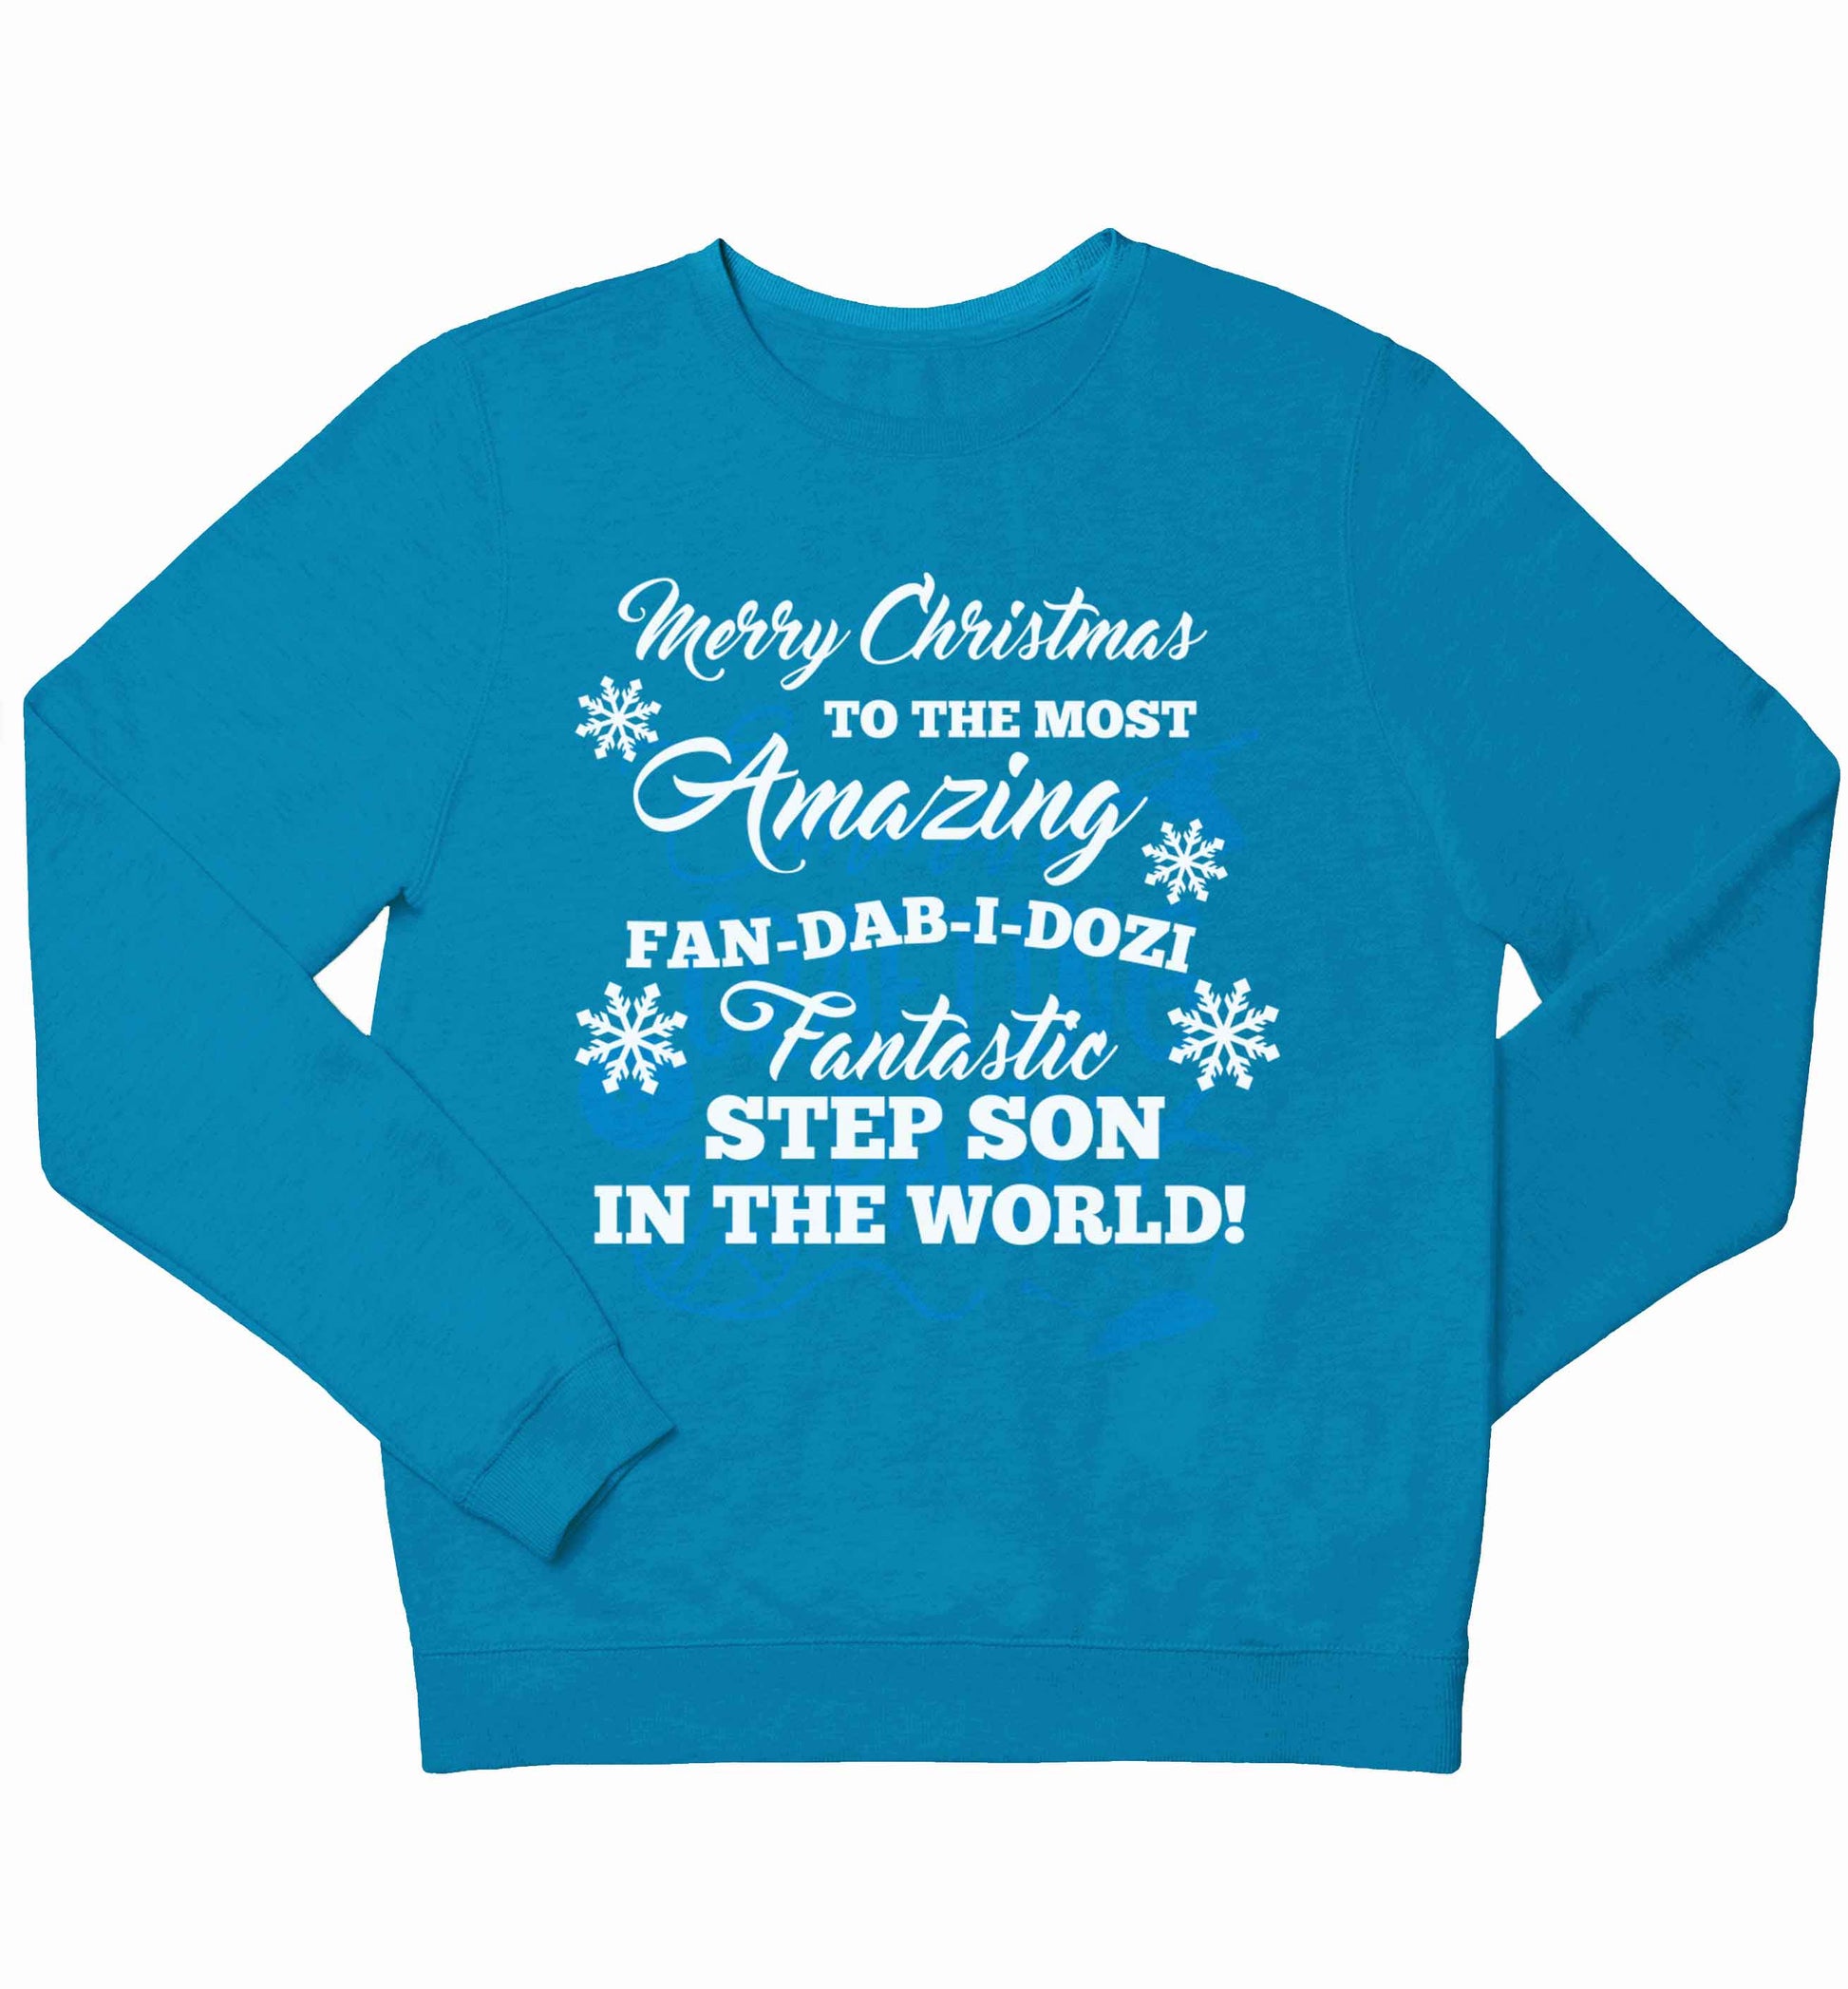 Merry Christmas to the most amazing fan-dab-i-dozi fantasic Step Son in the world children's blue sweater 12-13 Years